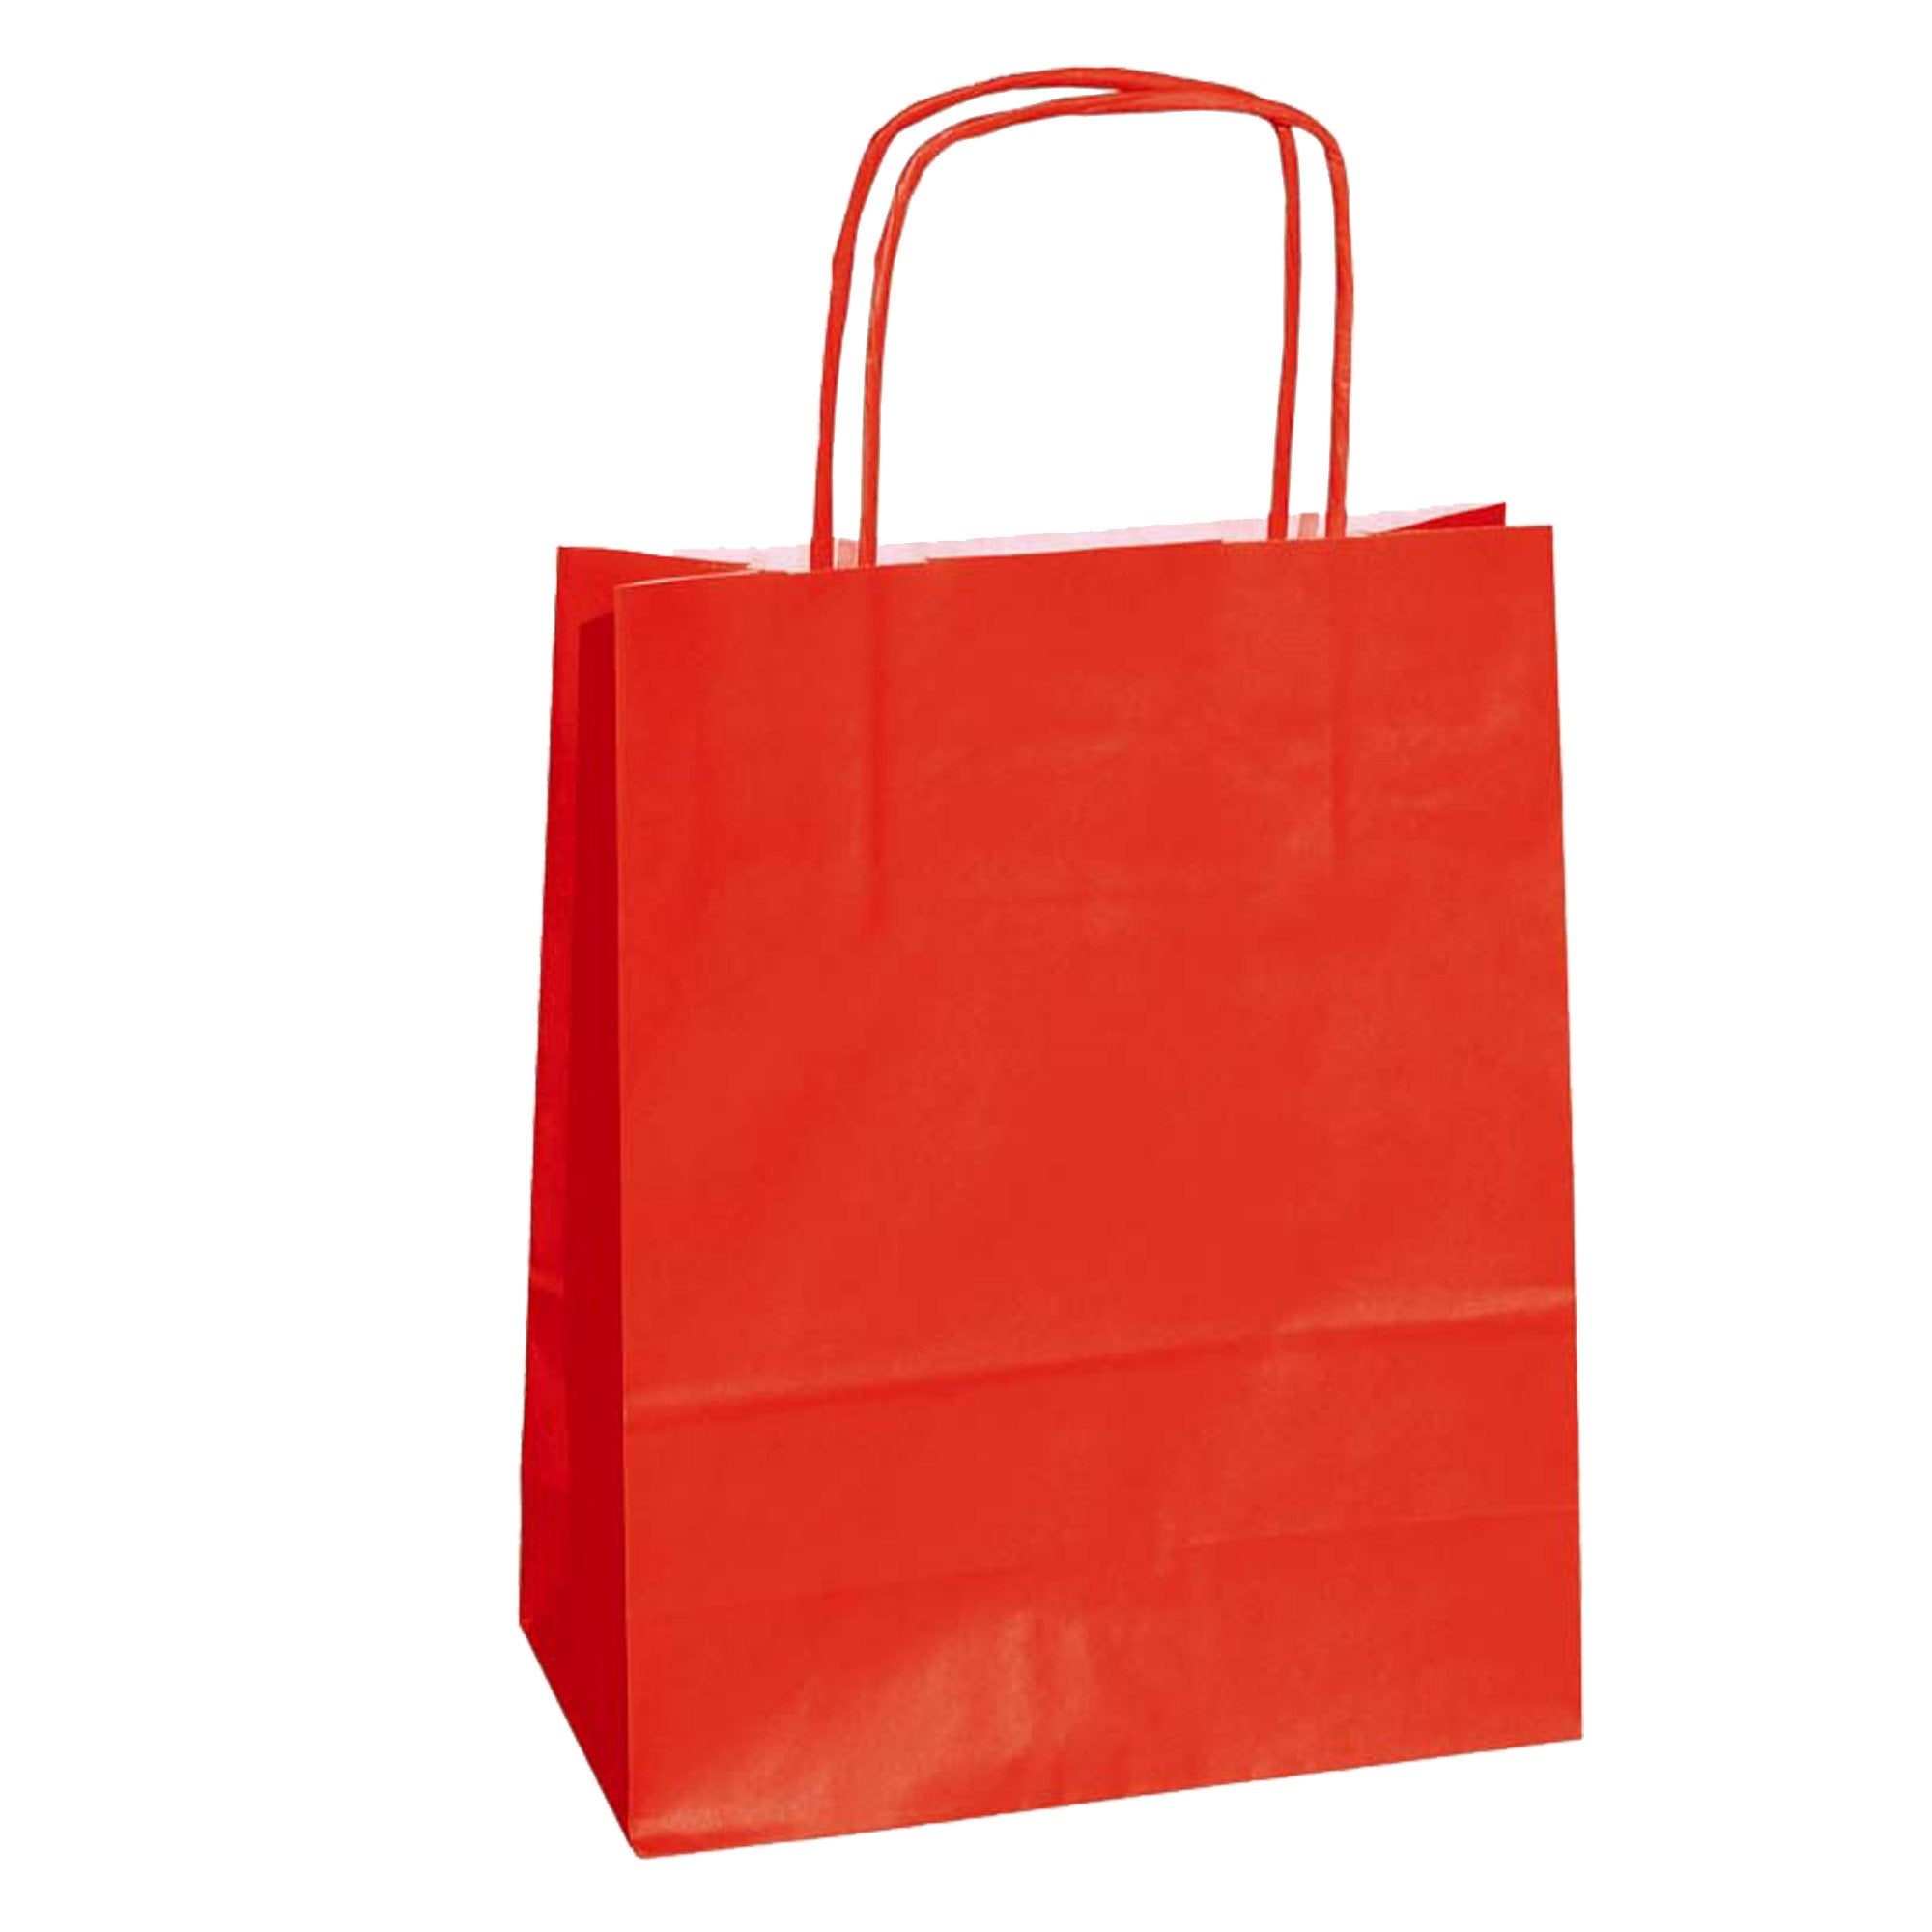 mainetti-bags-25-shoppers-carta-kraft-22x10x29cm-twisted-rosso